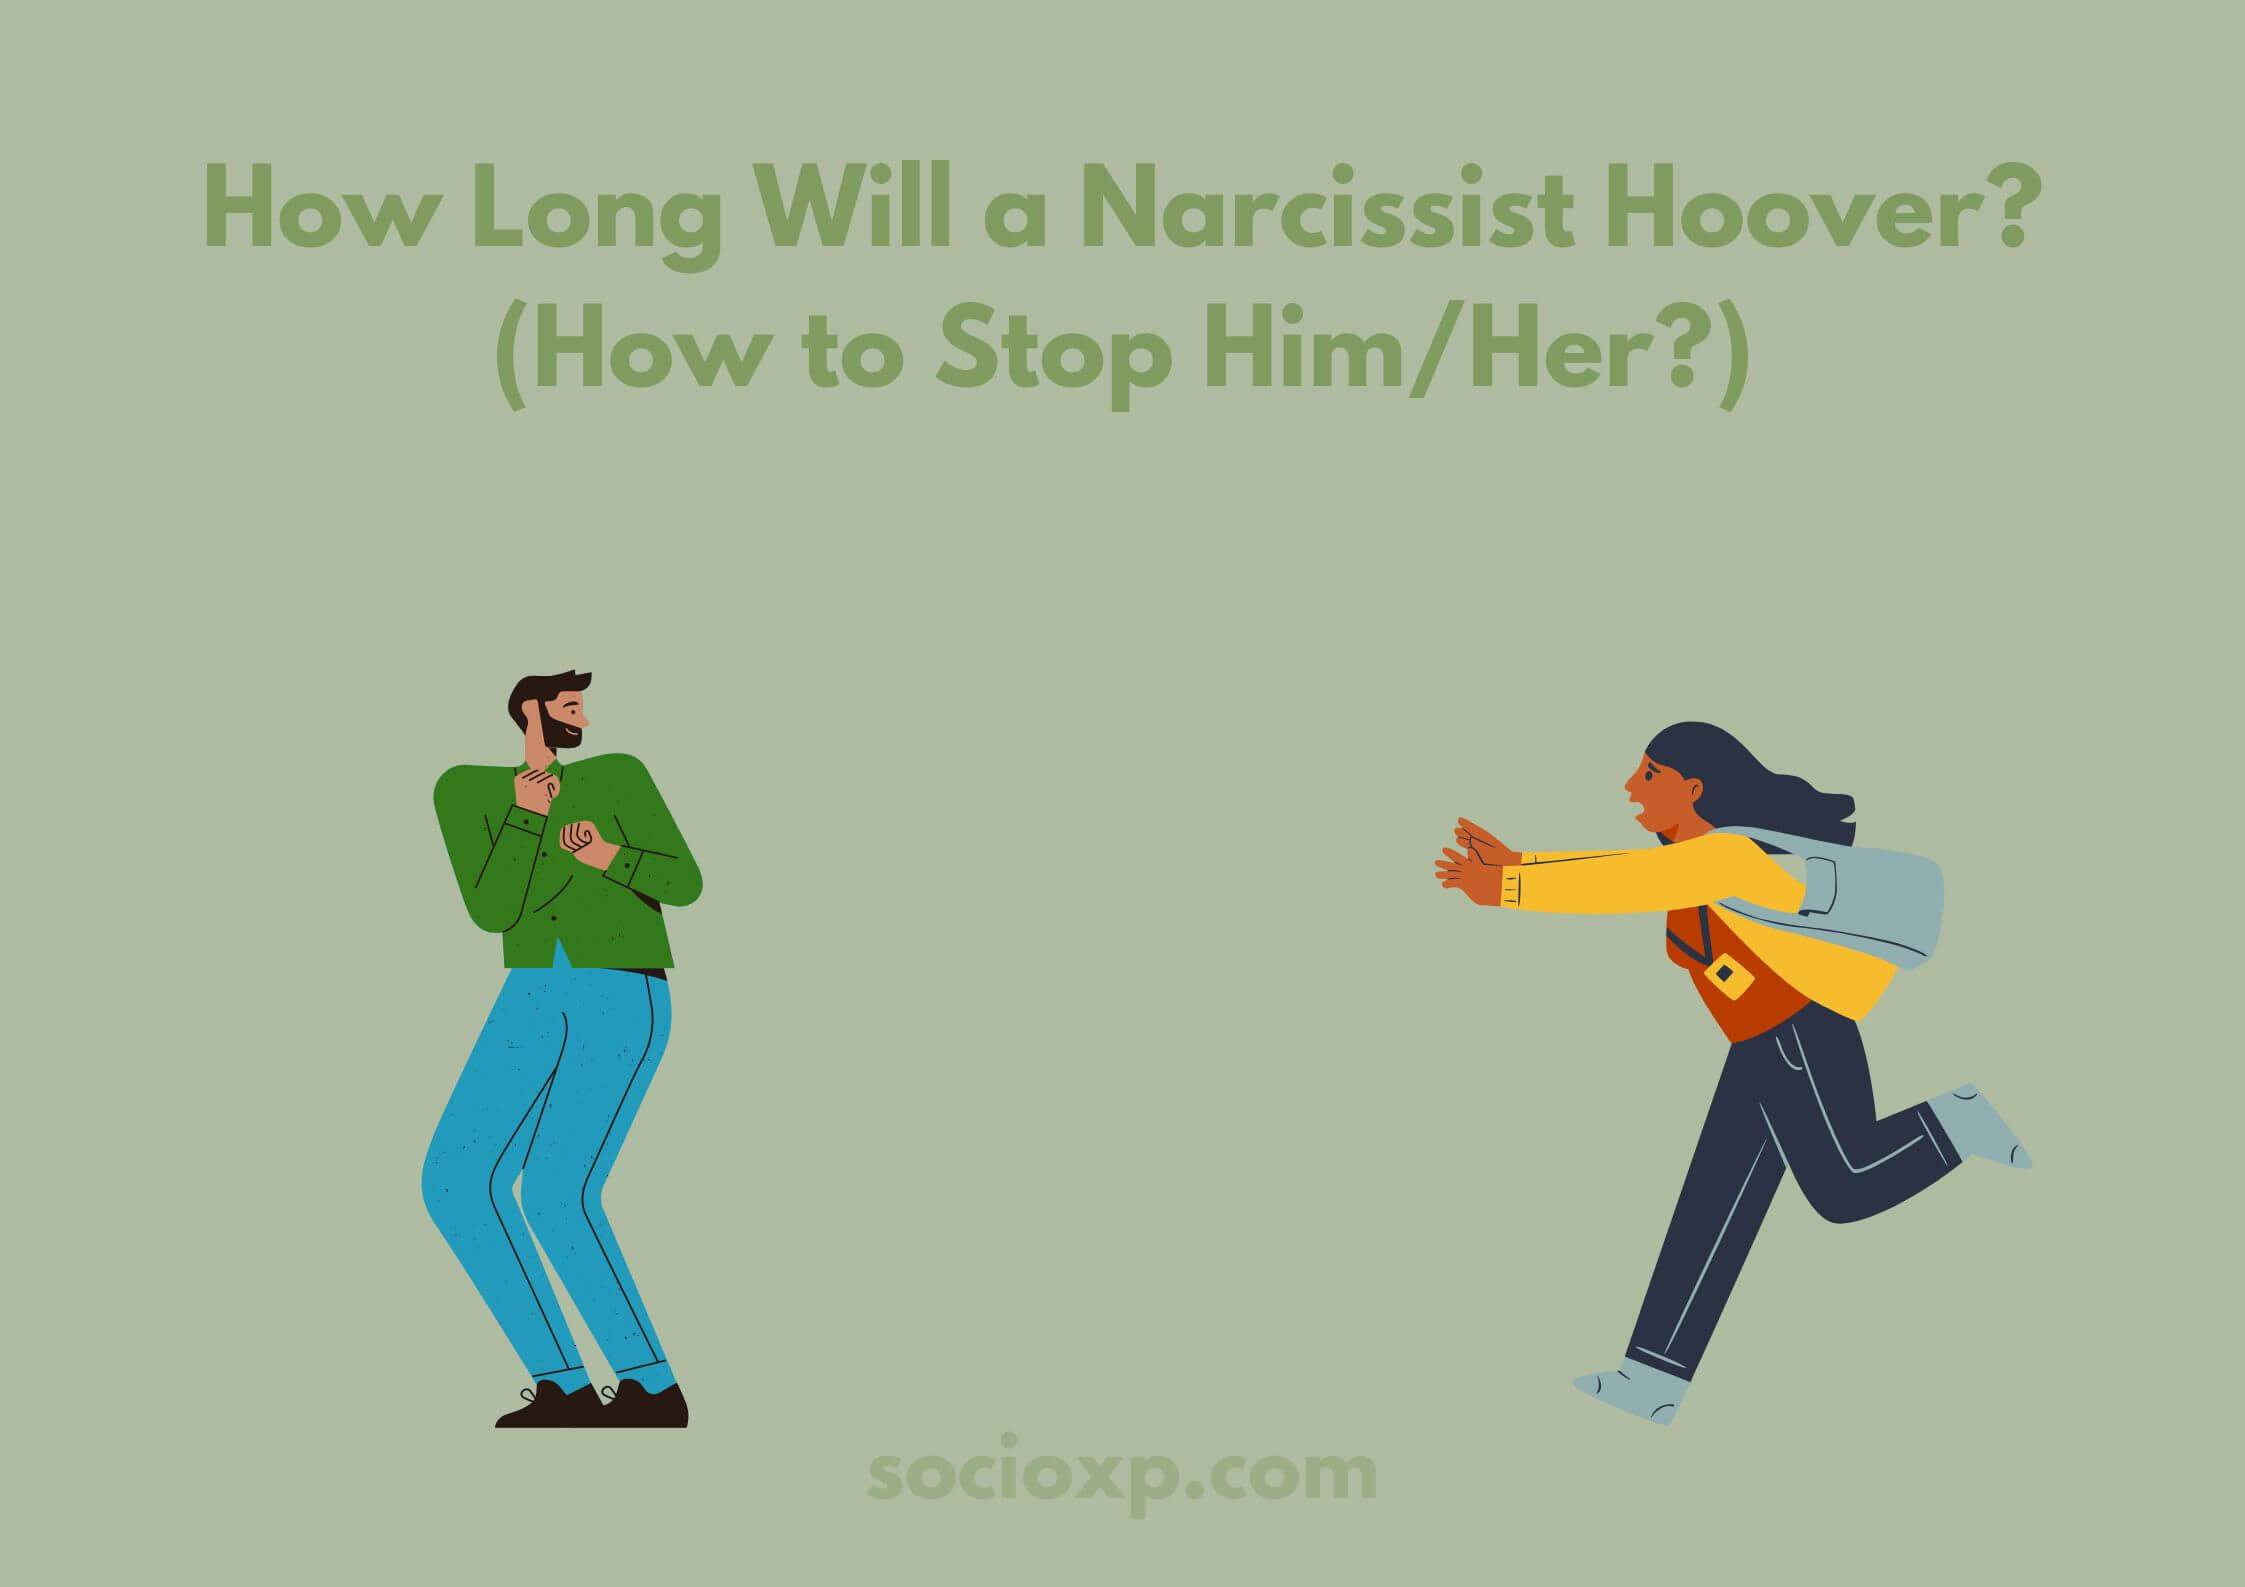 How Long Will a Narcissist Hoover? (How to Stop Him/Her?)